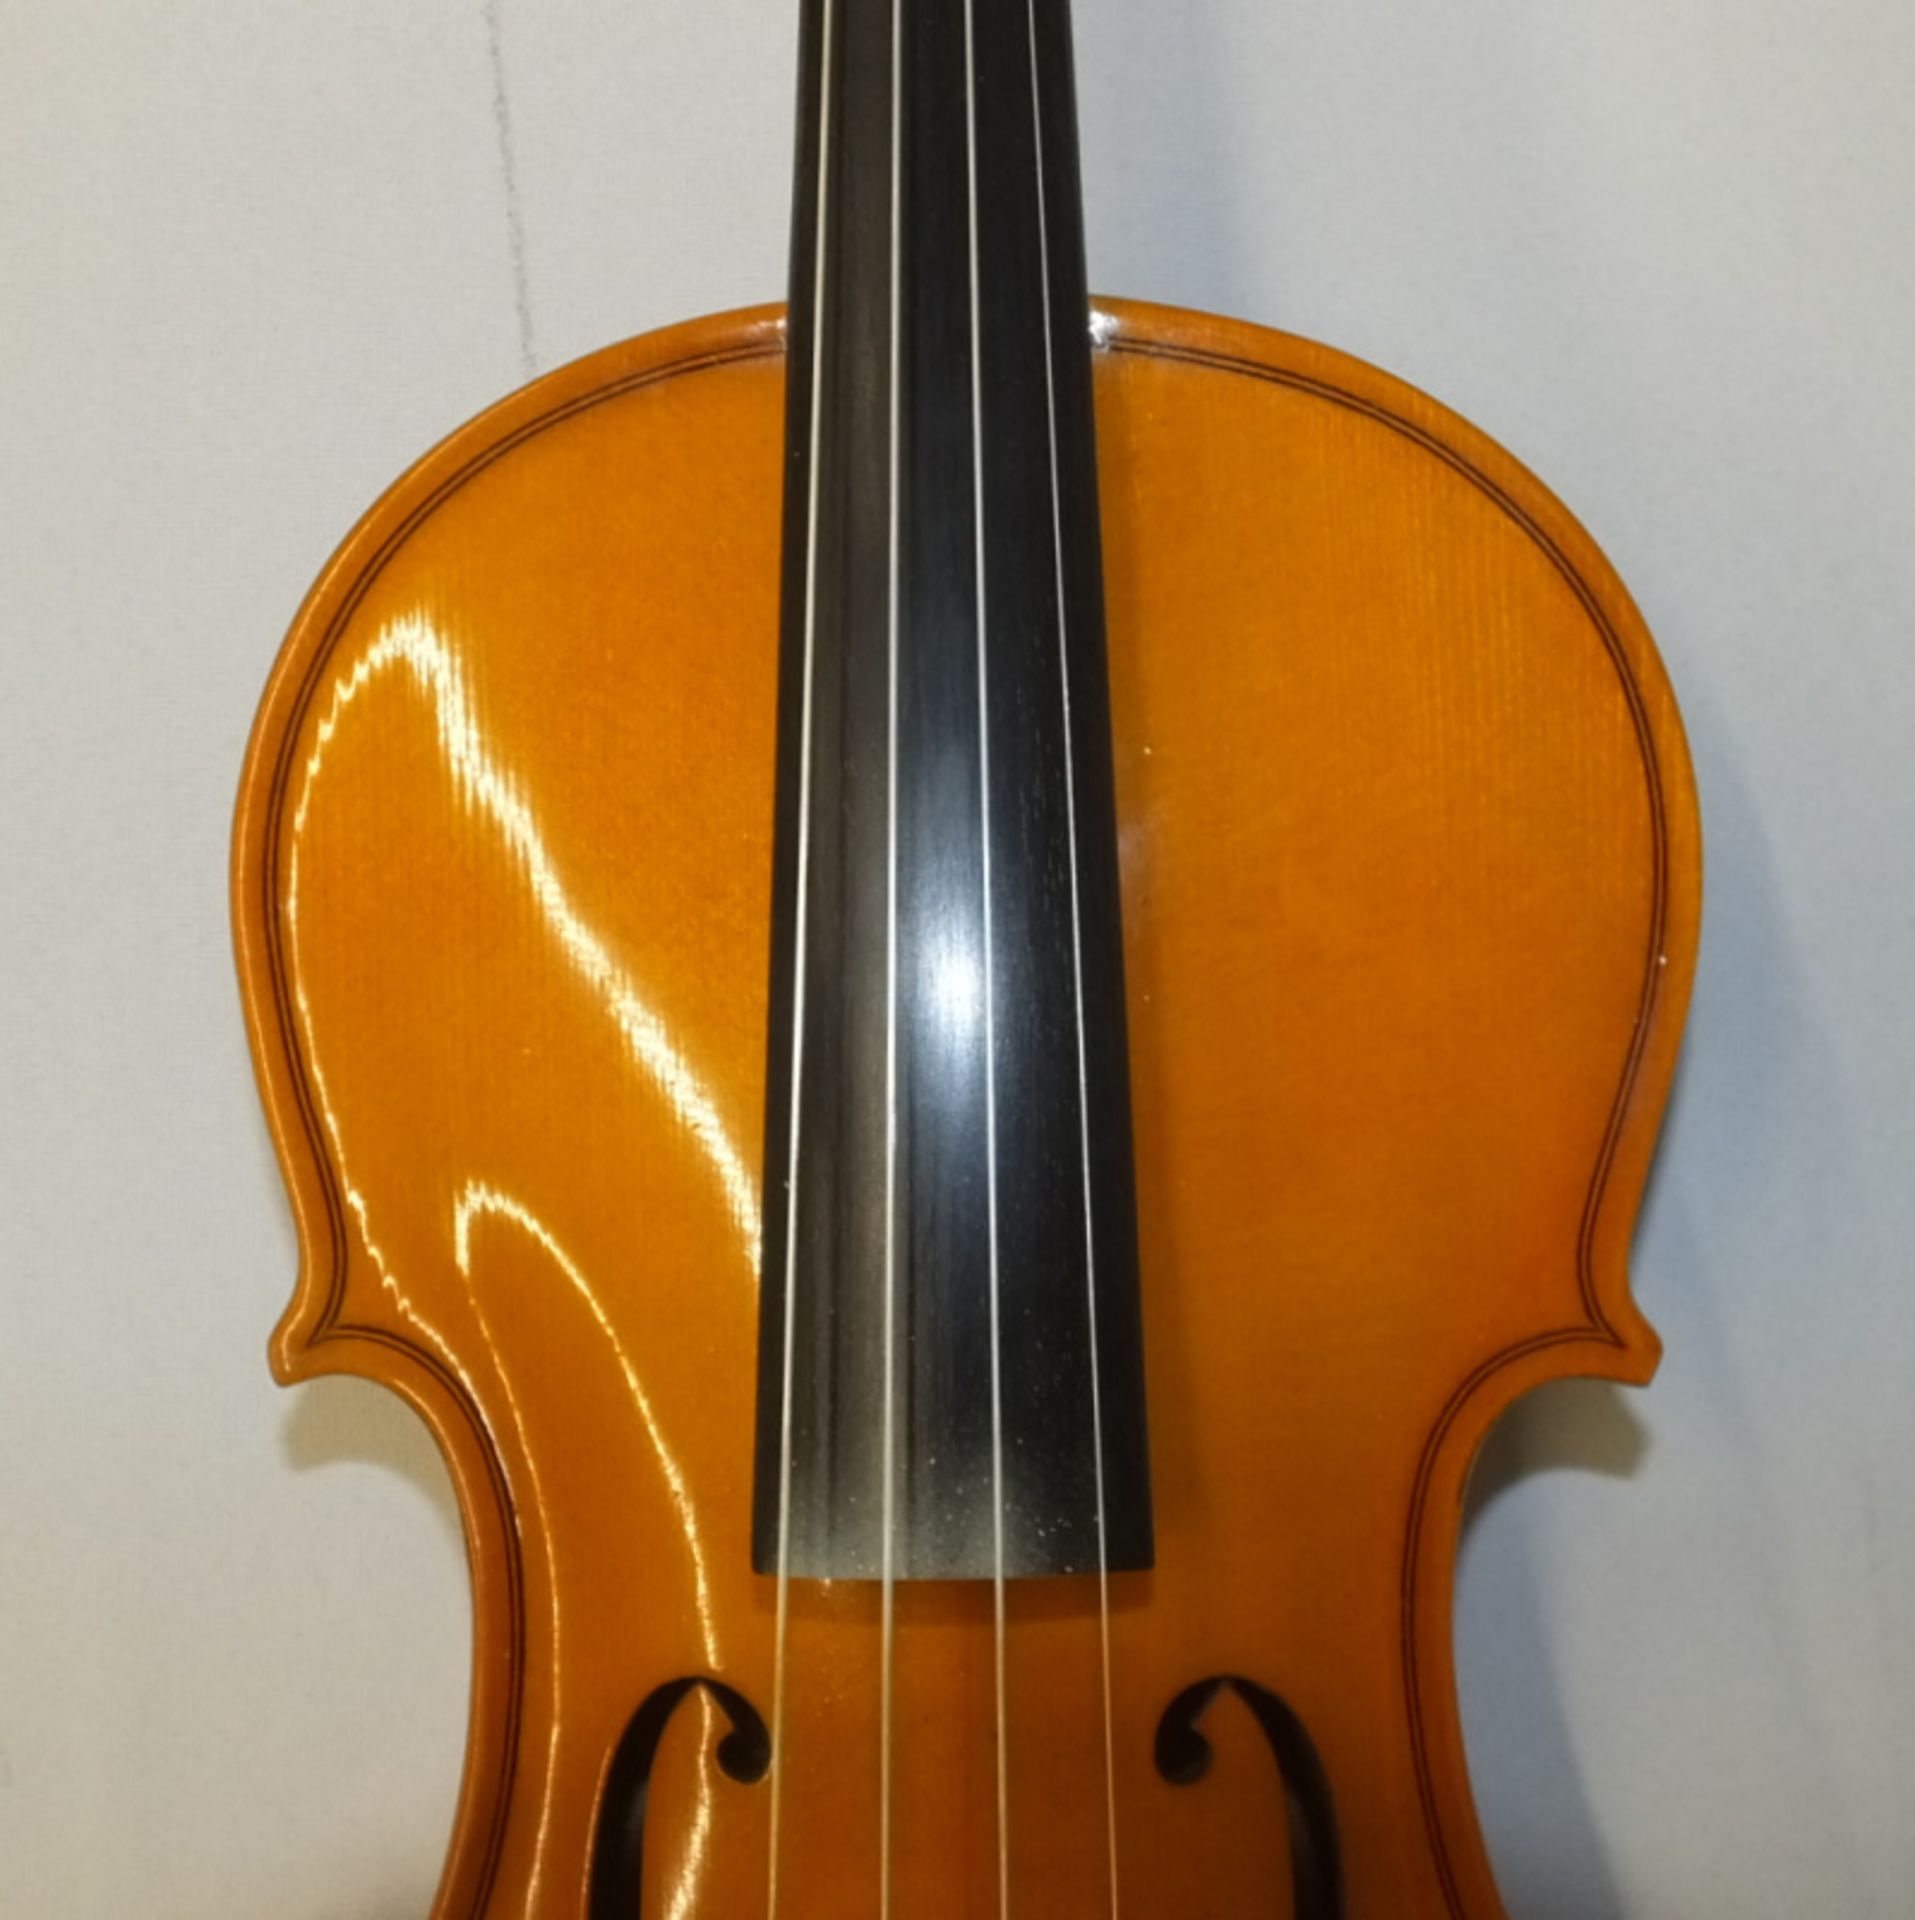 Andreas Zeller Violin & Case - Please check photos carefully for damaged or missing components - Image 5 of 17